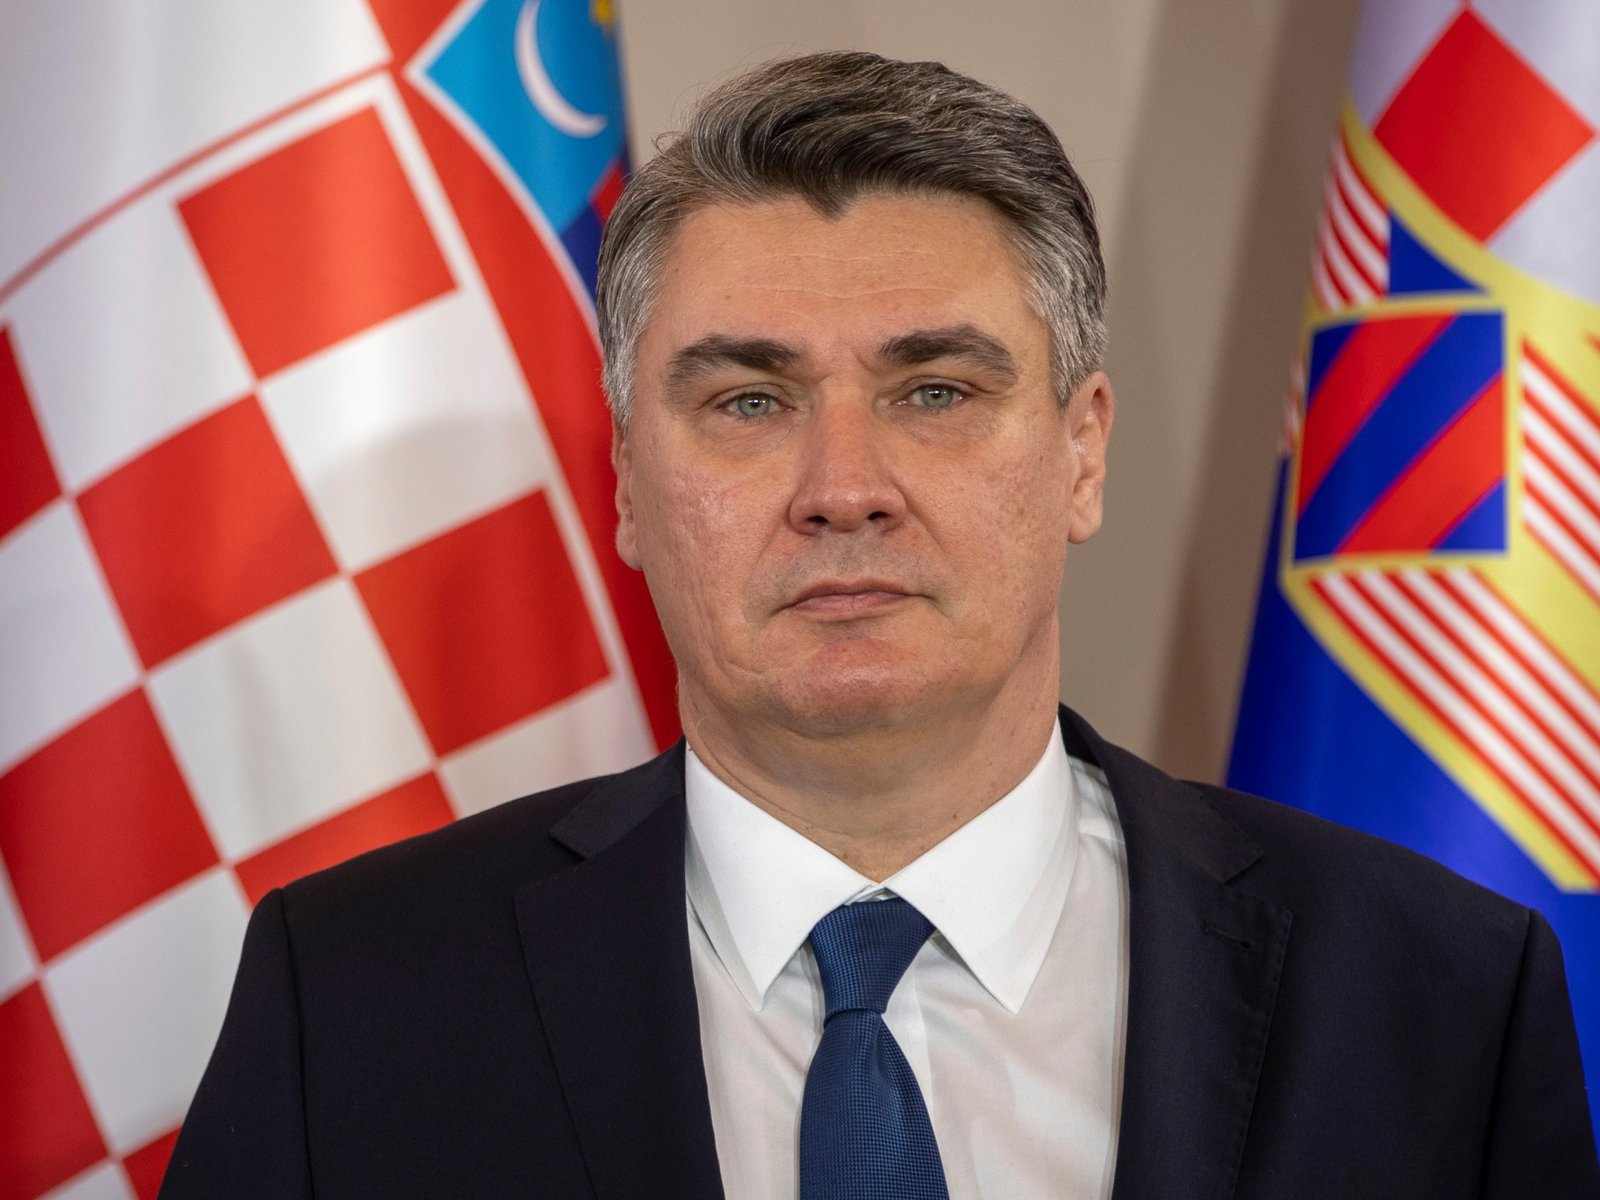 Croatia’s top court bars President Milanovic from becoming prime minister | Politics News